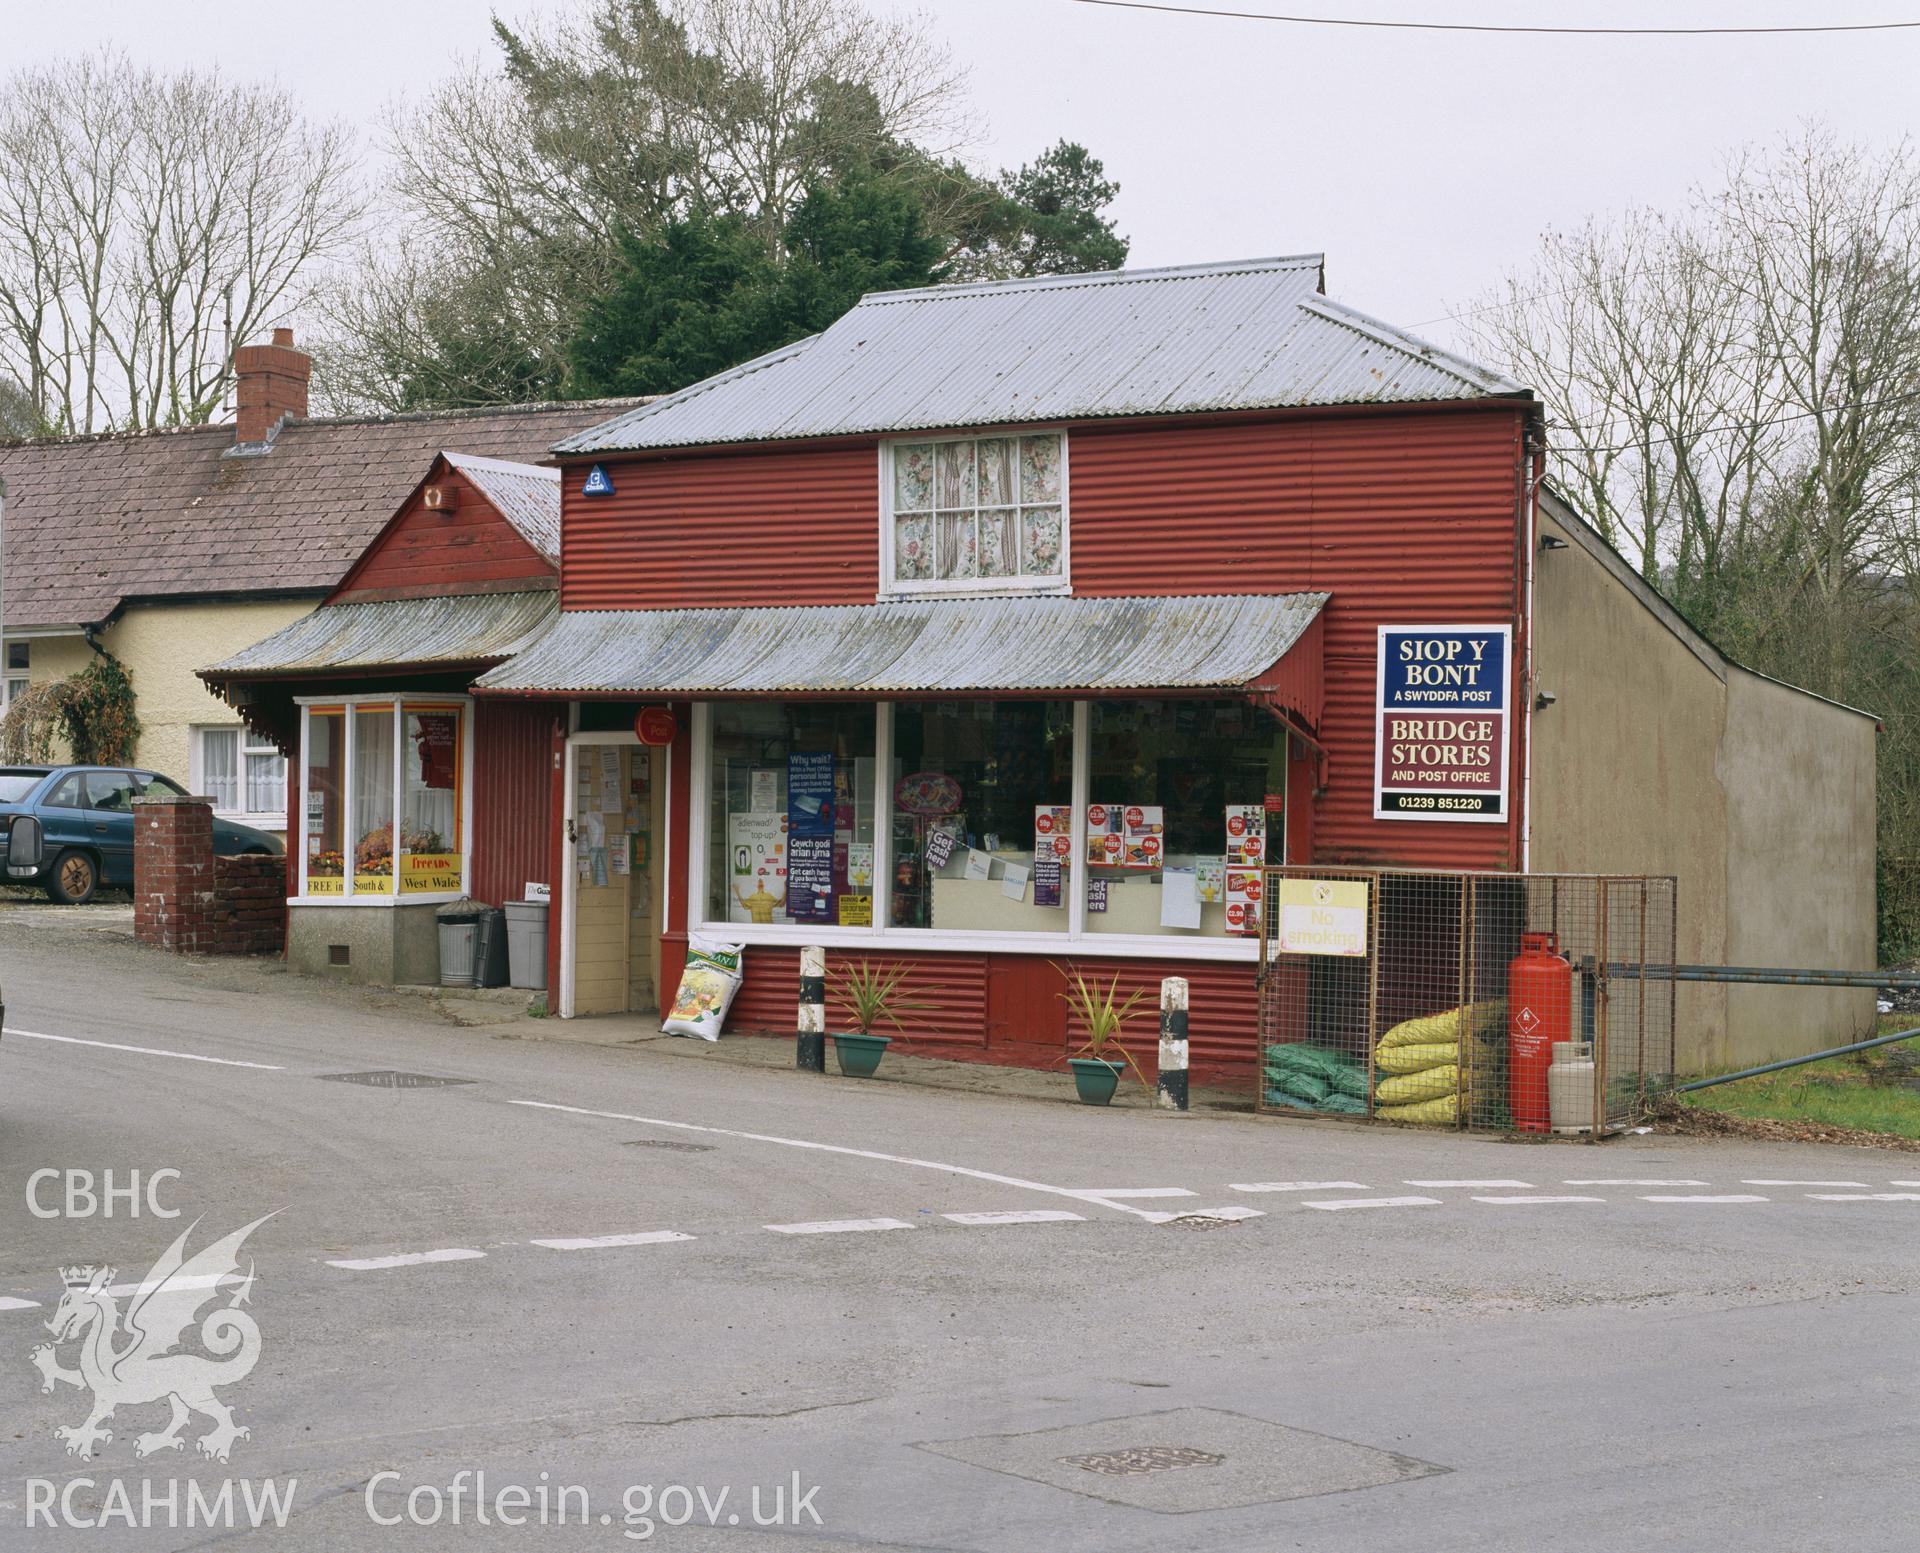 Colour transparency showing Post Office and Stores at Rhydlewis, produced by Iain Wright, June 2004